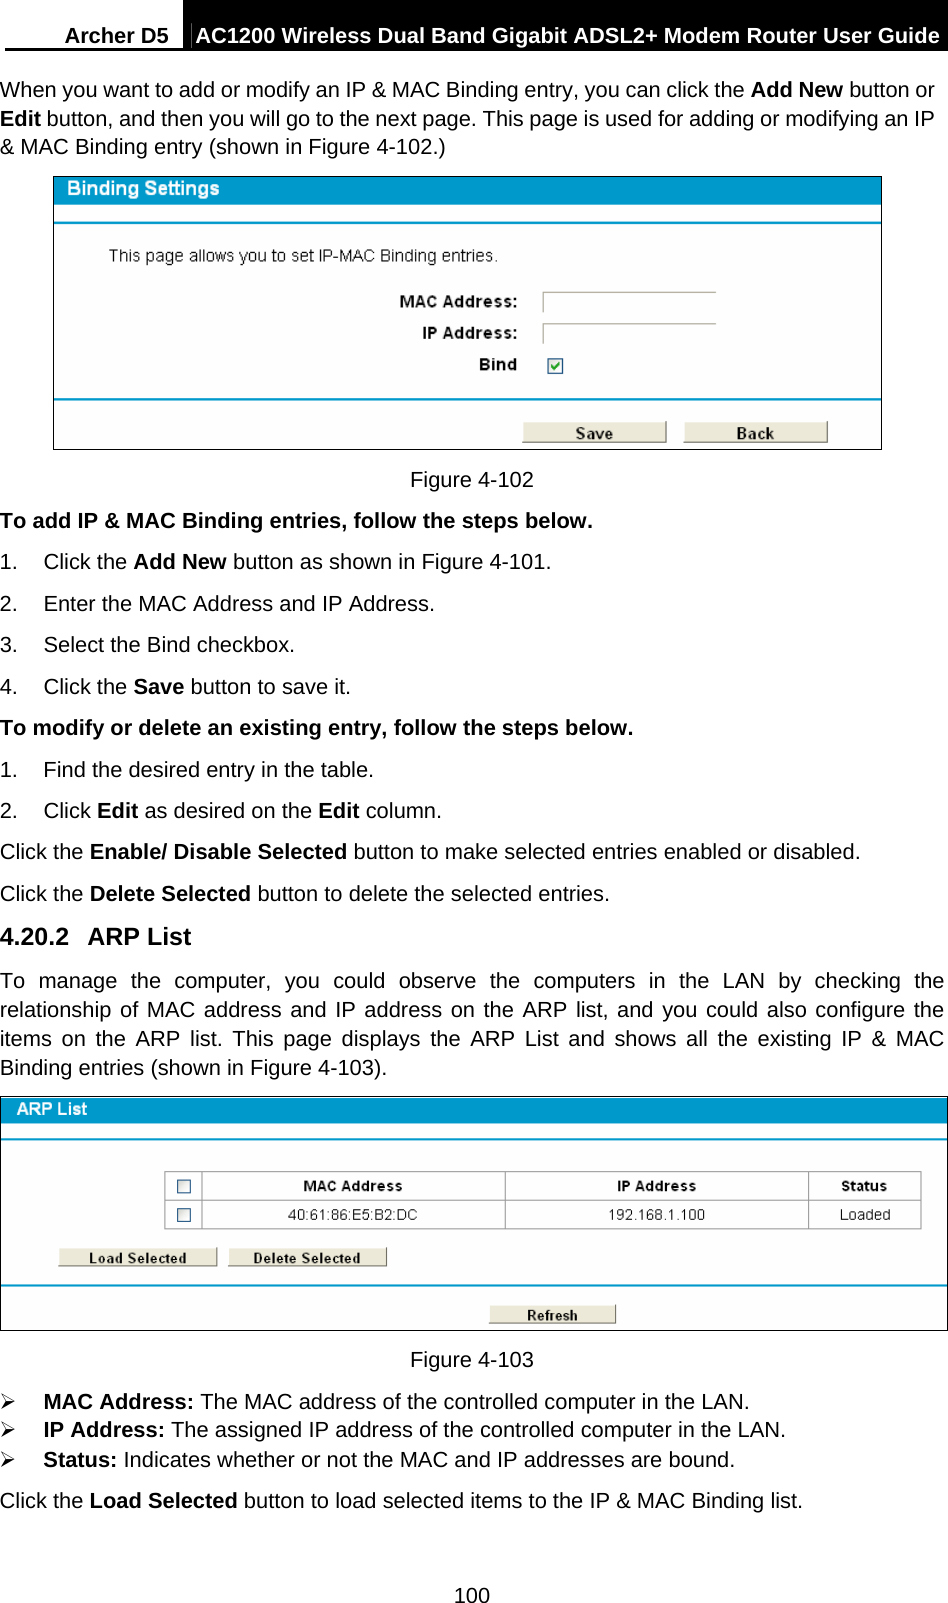 Archer D5  AC1200 Wireless Dual Band Gigabit ADSL2+ Modem Router User Guide 100 When you want to add or modify an IP &amp; MAC Binding entry, you can click the Add New button or Edit button, and then you will go to the next page. This page is used for adding or modifying an IP &amp; MAC Binding entry (shown in Figure 4-102.)  Figure 4-102   To add IP &amp; MAC Binding entries, follow the steps below. 1. Click the Add New button as shown in Figure 4-101.  2.  Enter the MAC Address and IP Address. 3.  Select the Bind checkbox.   4. Click the Save button to save it. To modify or delete an existing entry, follow the steps below. 1.  Find the desired entry in the table.   2. Click Edit as desired on the Edit column.   Click the Enable/ Disable Selected button to make selected entries enabled or disabled. Click the Delete Selected button to delete the selected entries. 4.20.2  ARP List To manage the computer, you could observe the computers in the LAN by checking the relationship of MAC address and IP address on the ARP list, and you could also configure the items on the ARP list. This page displays the ARP List and shows all the existing IP &amp; MAC Binding entries (shown in Figure 4-103).  Figure 4-103  MAC Address: The MAC address of the controlled computer in the LAN.    IP Address: The assigned IP address of the controlled computer in the LAN.    Status: Indicates whether or not the MAC and IP addresses are bound. Click the Load Selected button to load selected items to the IP &amp; MAC Binding list. 